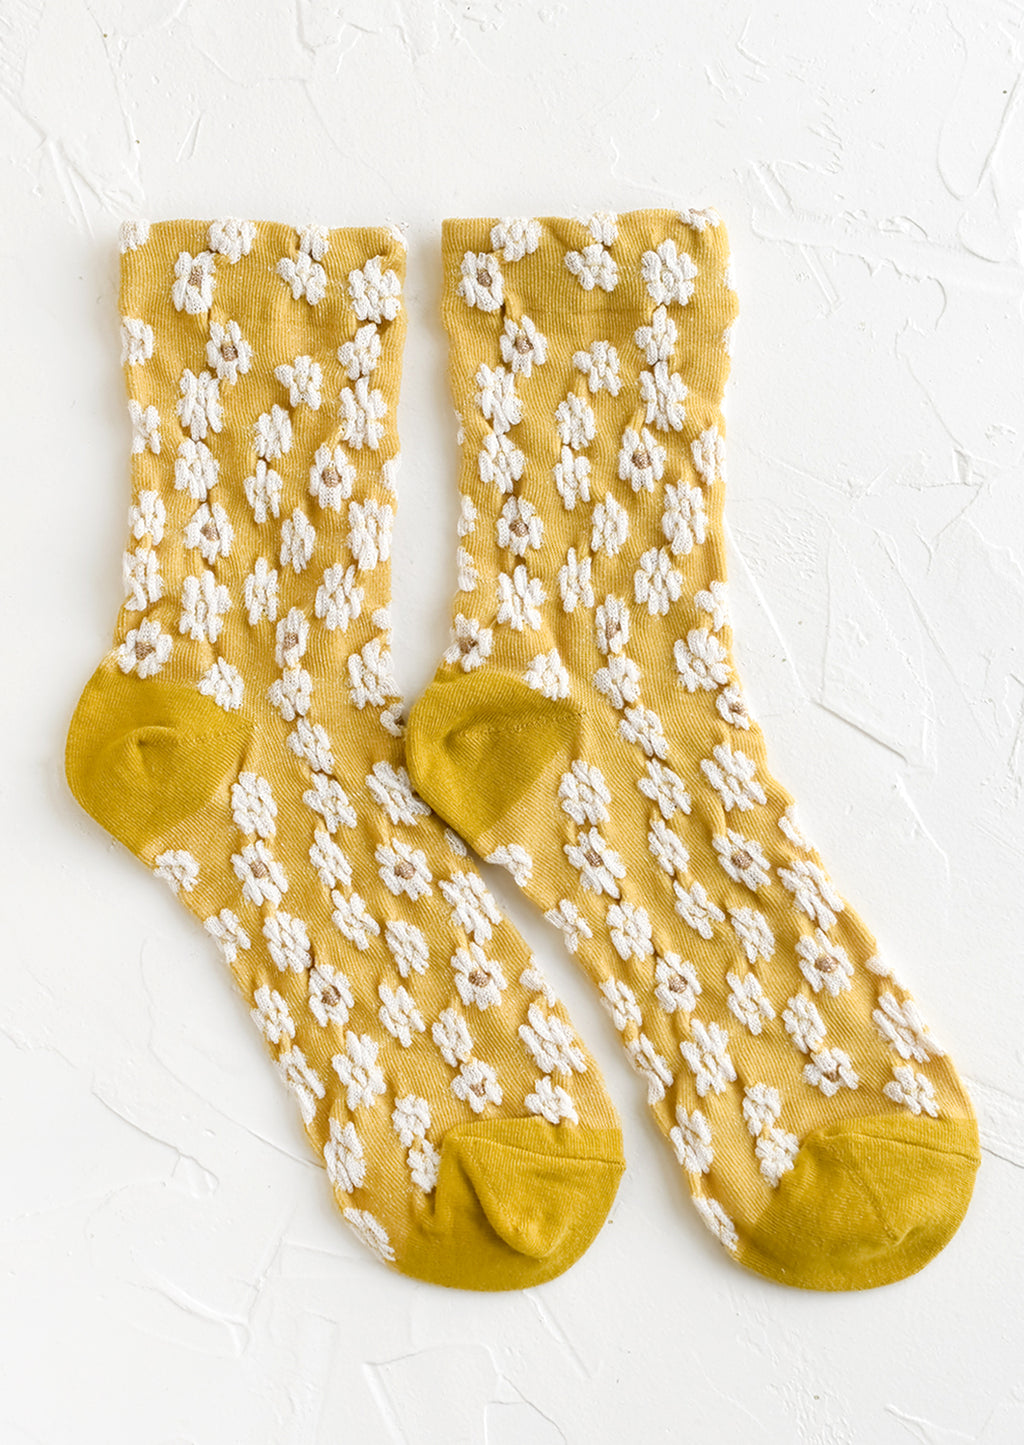 Yellow: A pair of non-sheer yellow socks with allover white daisy pattern.